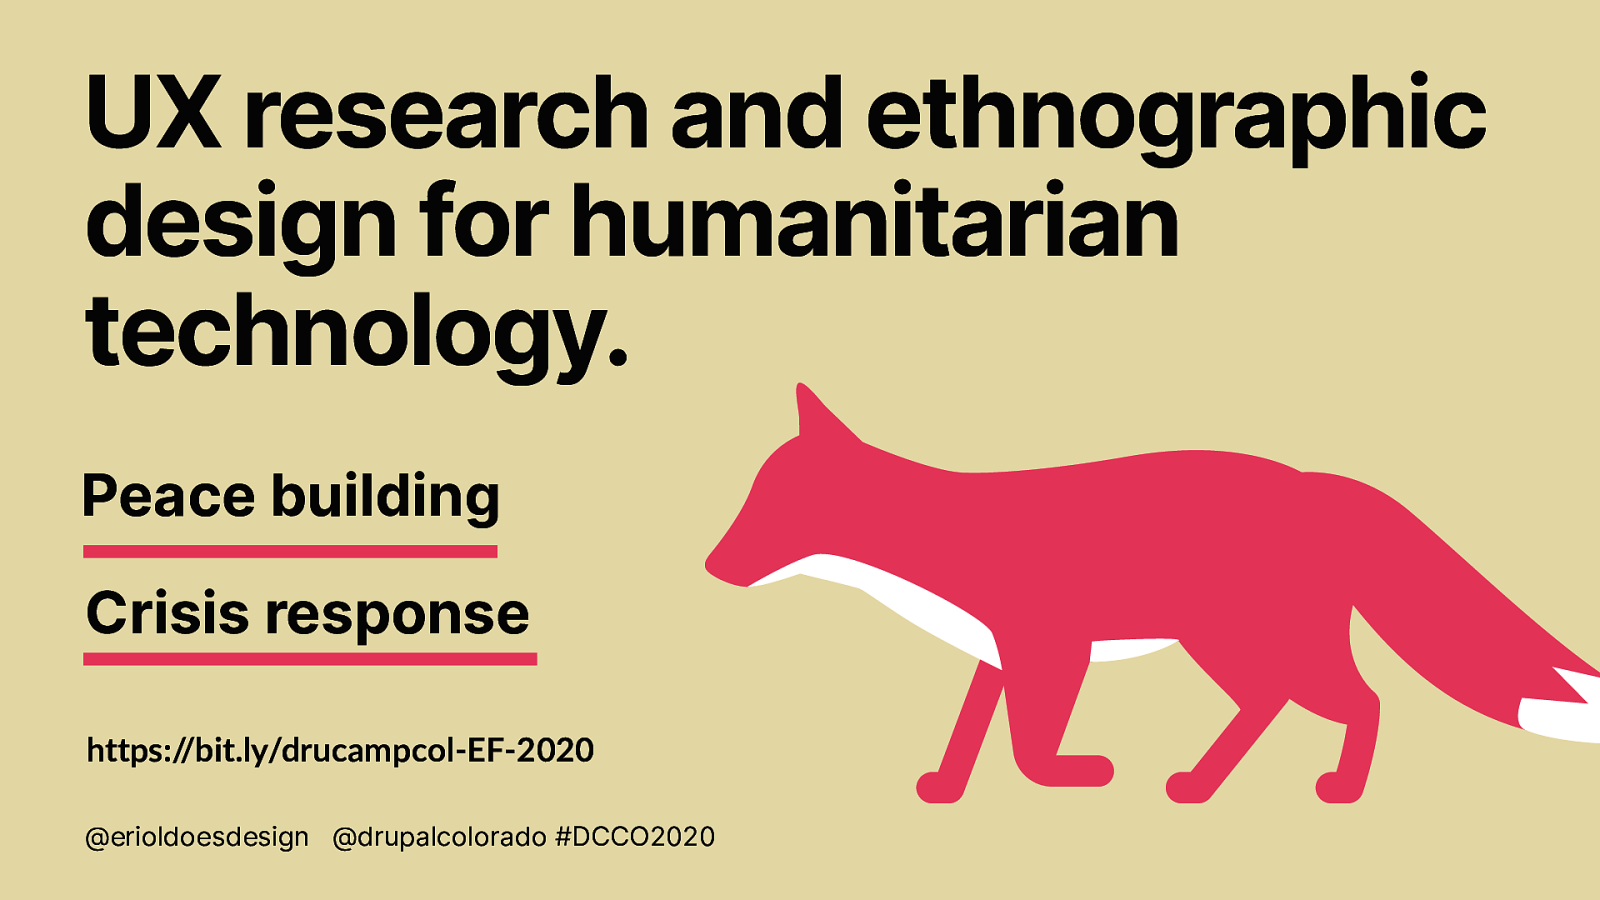 UX research and ethnographic design for humanitarian technology